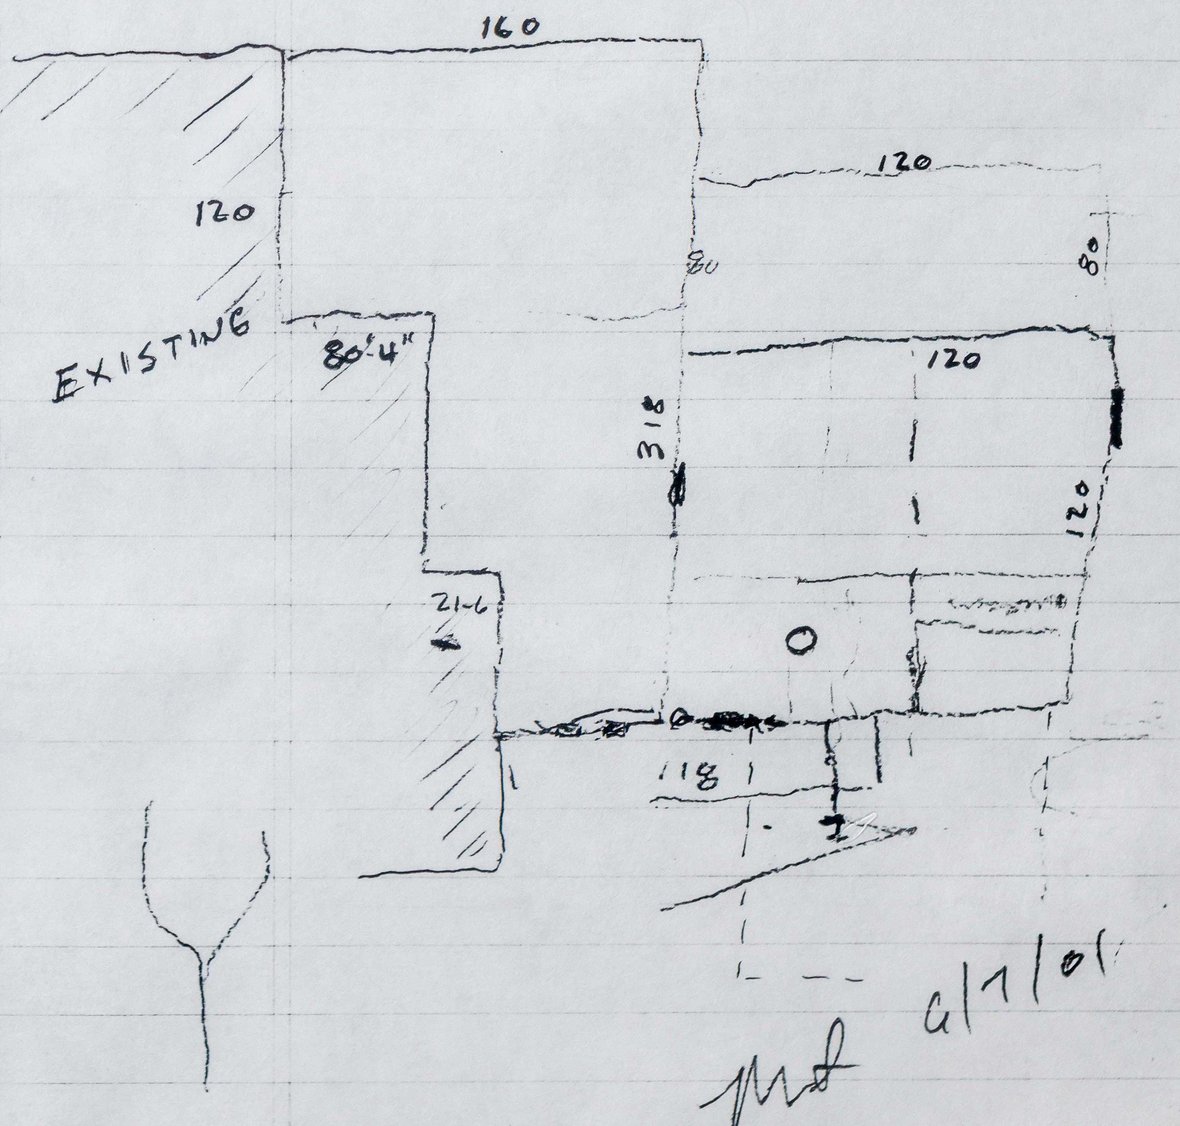 Cocktail Napkin construction sketch for building an addition with Badger Liquor